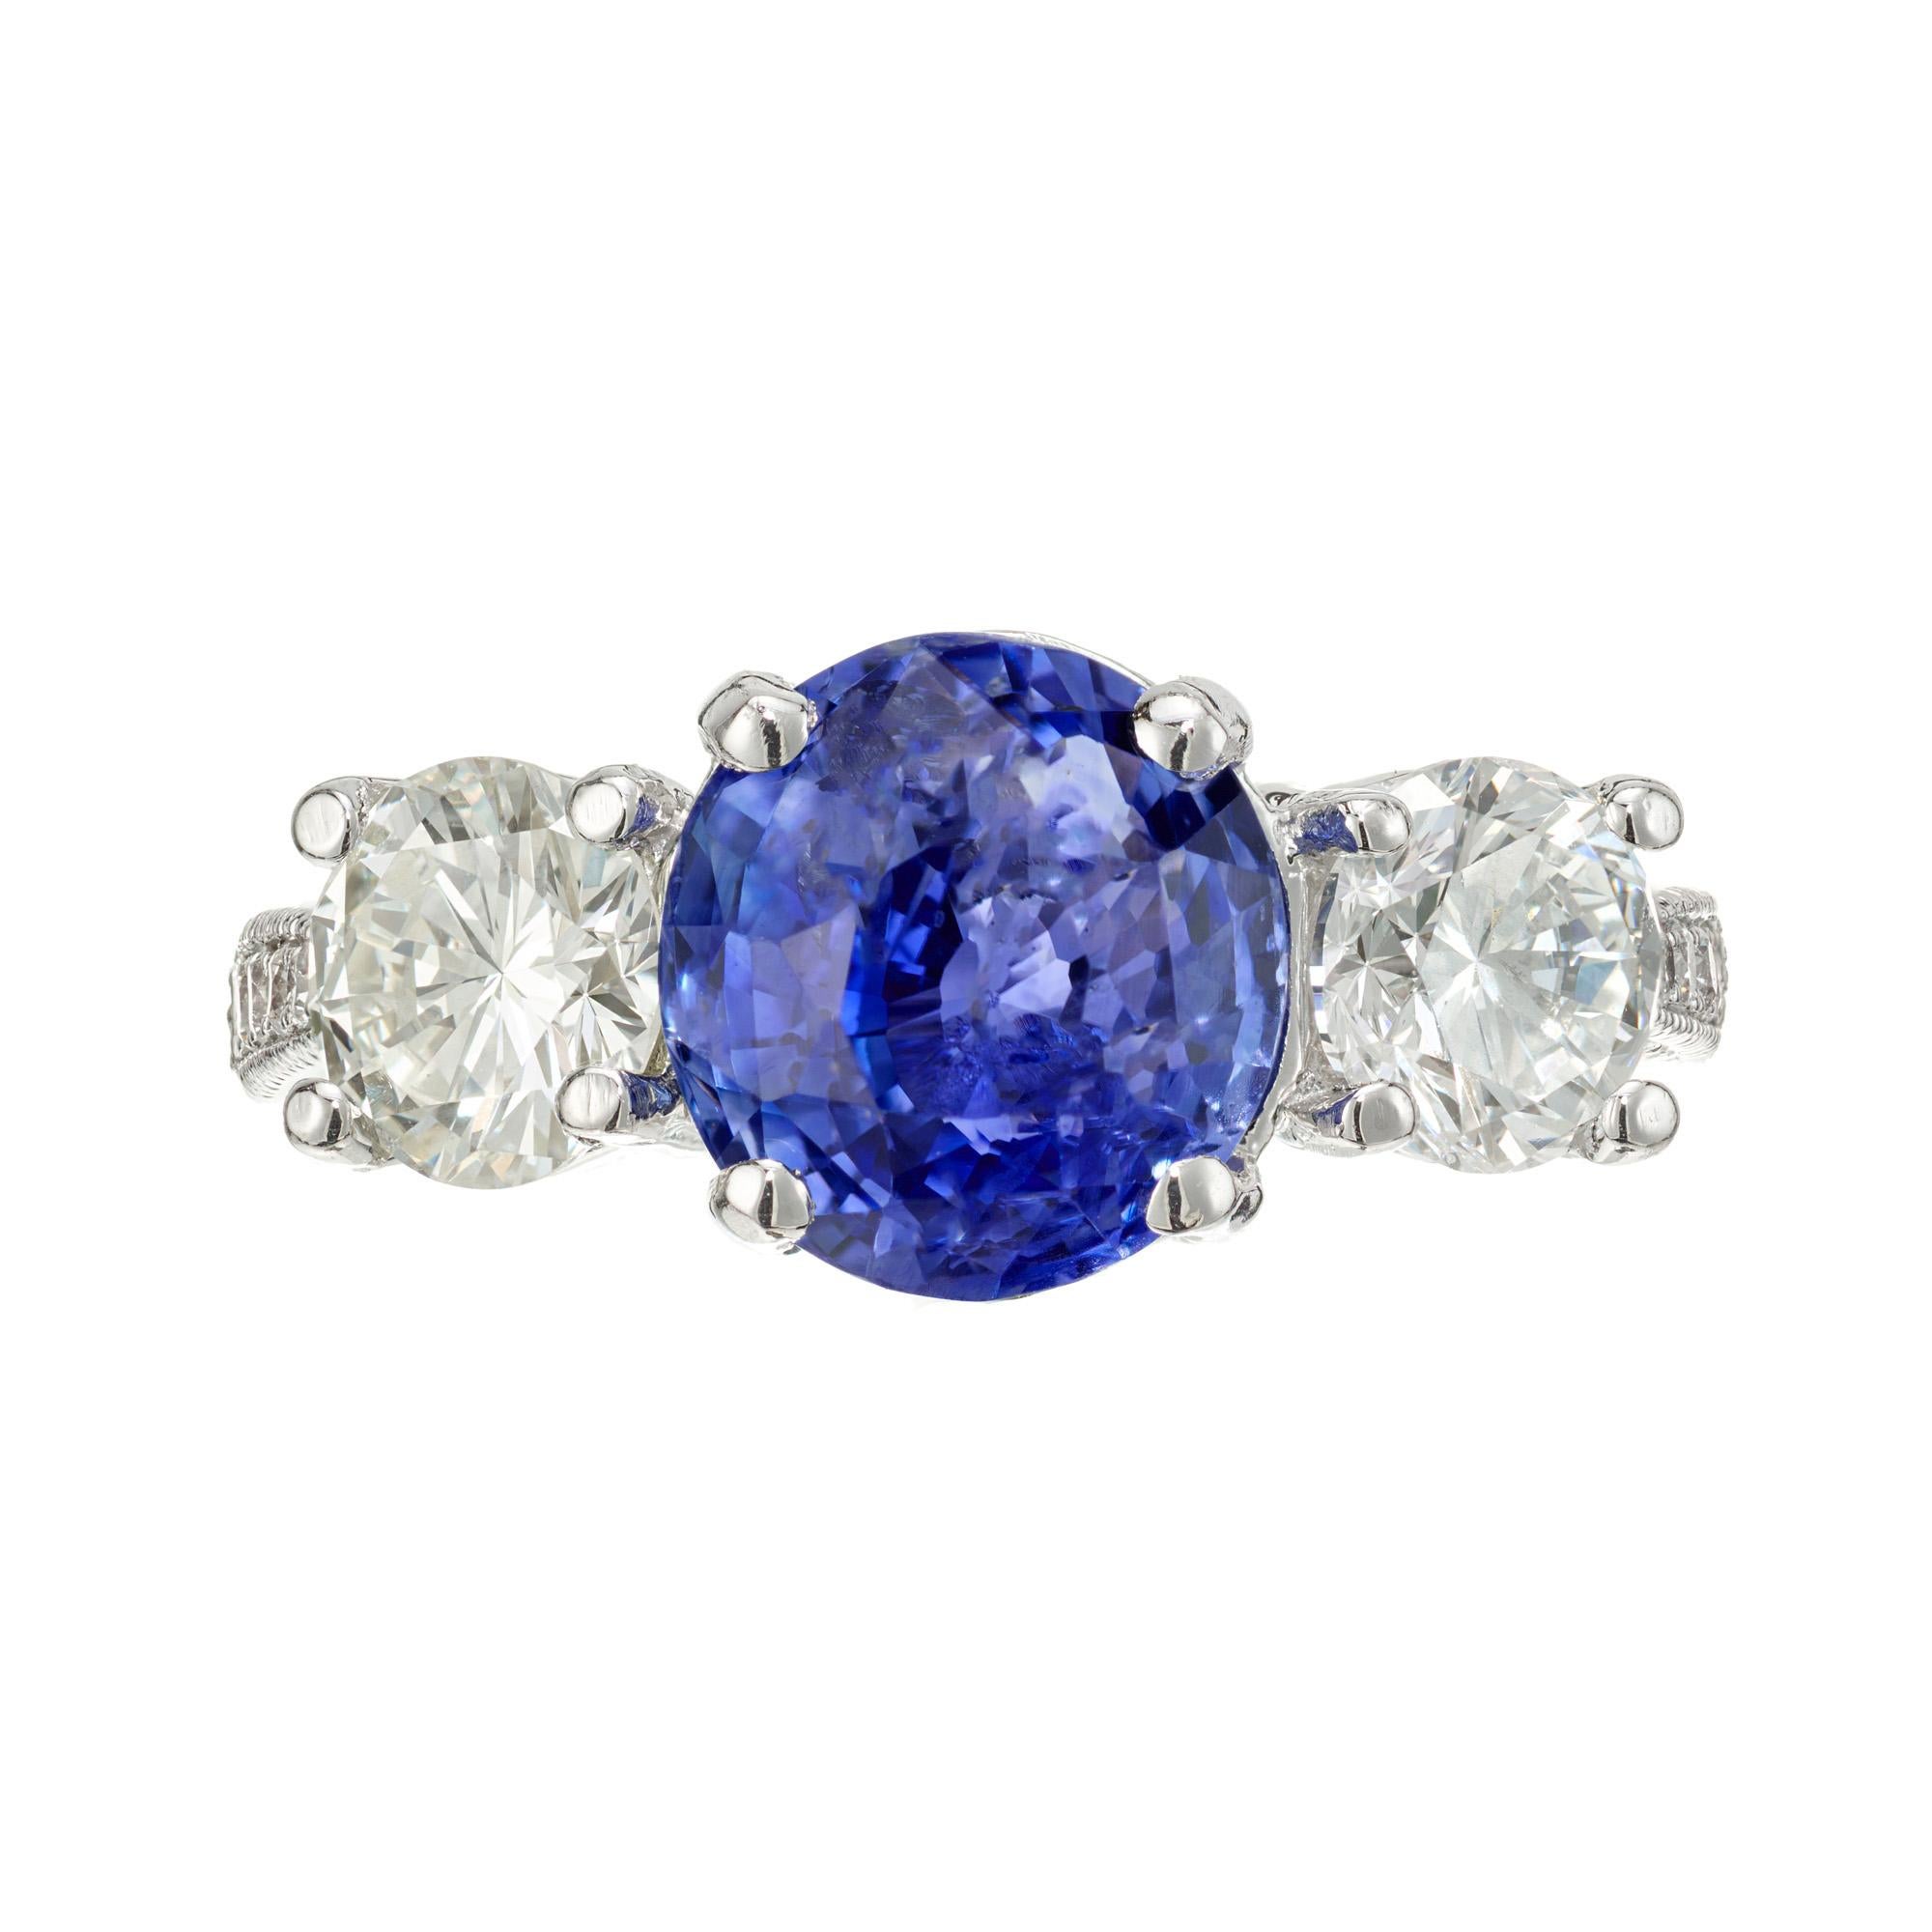 Sapphire and diamond engagement ring. GIA certified Old European cut blue sapphire set in a platinum three-stone setting with two round side diamonds. 10 round diamonds accent diamonds. Certified as Sapphire simple heat only.

1 old European cut